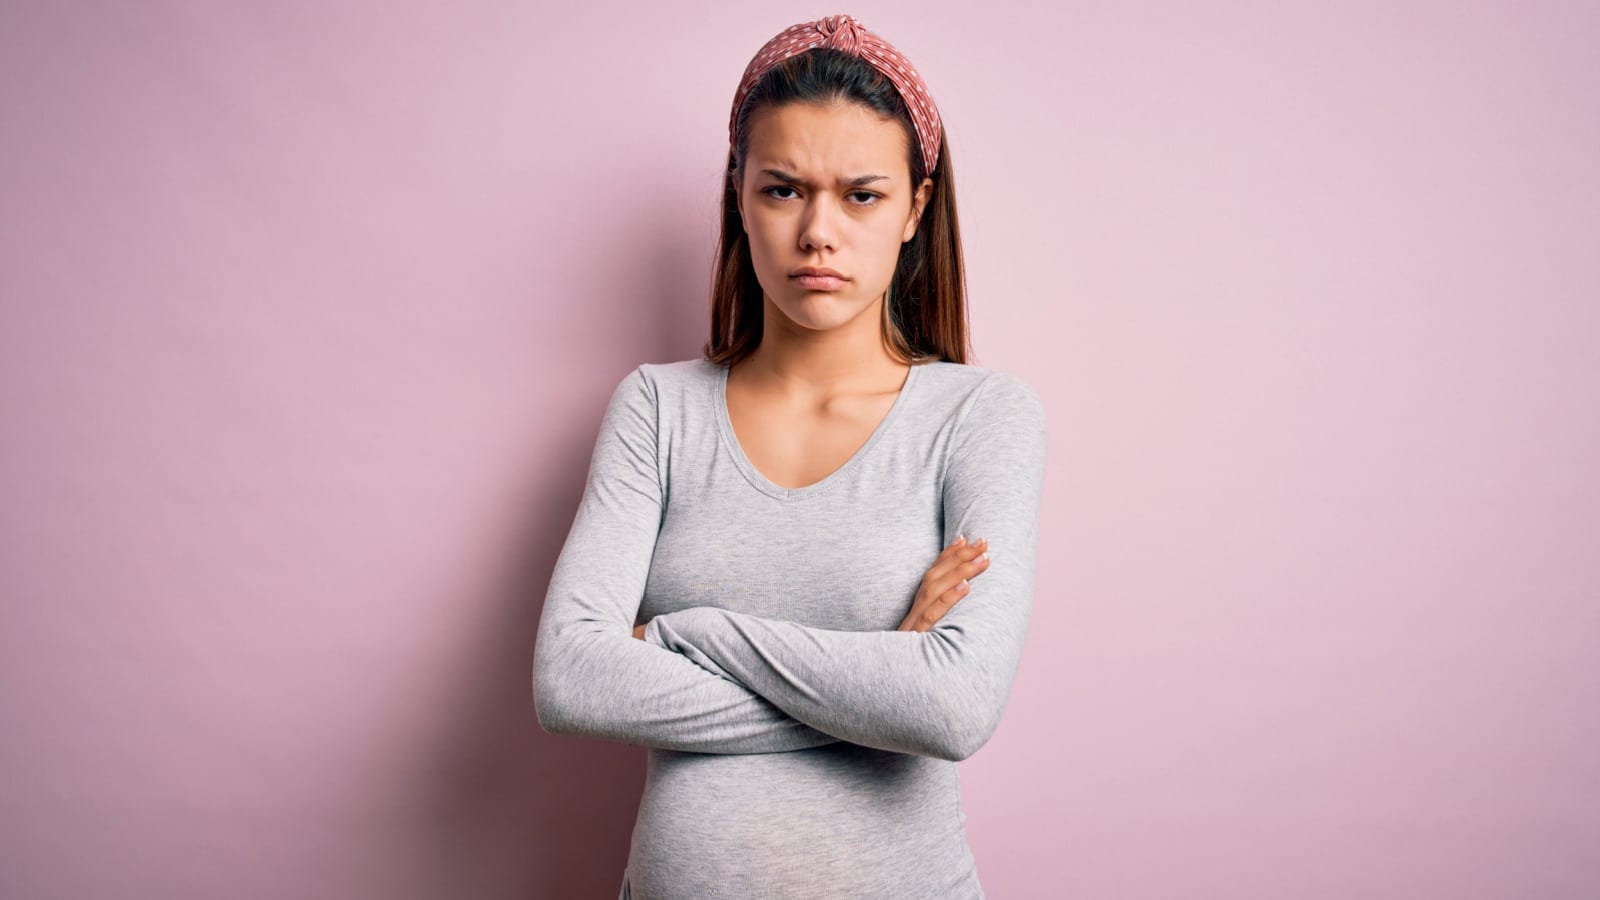 Angry Annoyed Pregnant Woman Shutterstock